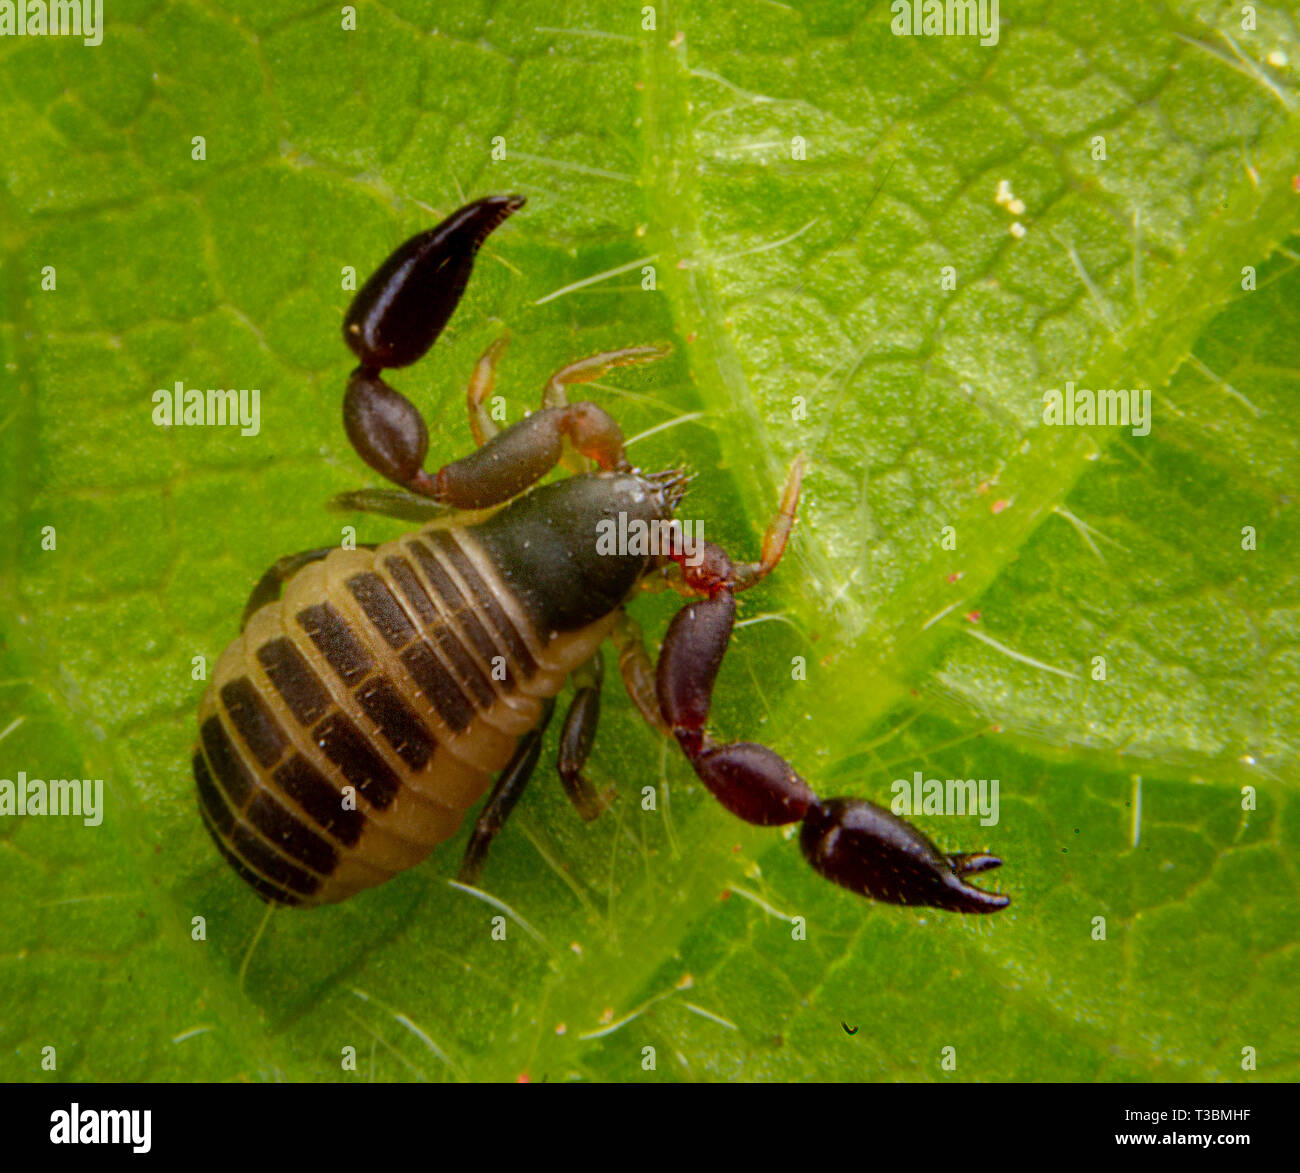 2 milimeters baby pseudo scorpion posing on a green leave Stock Photo